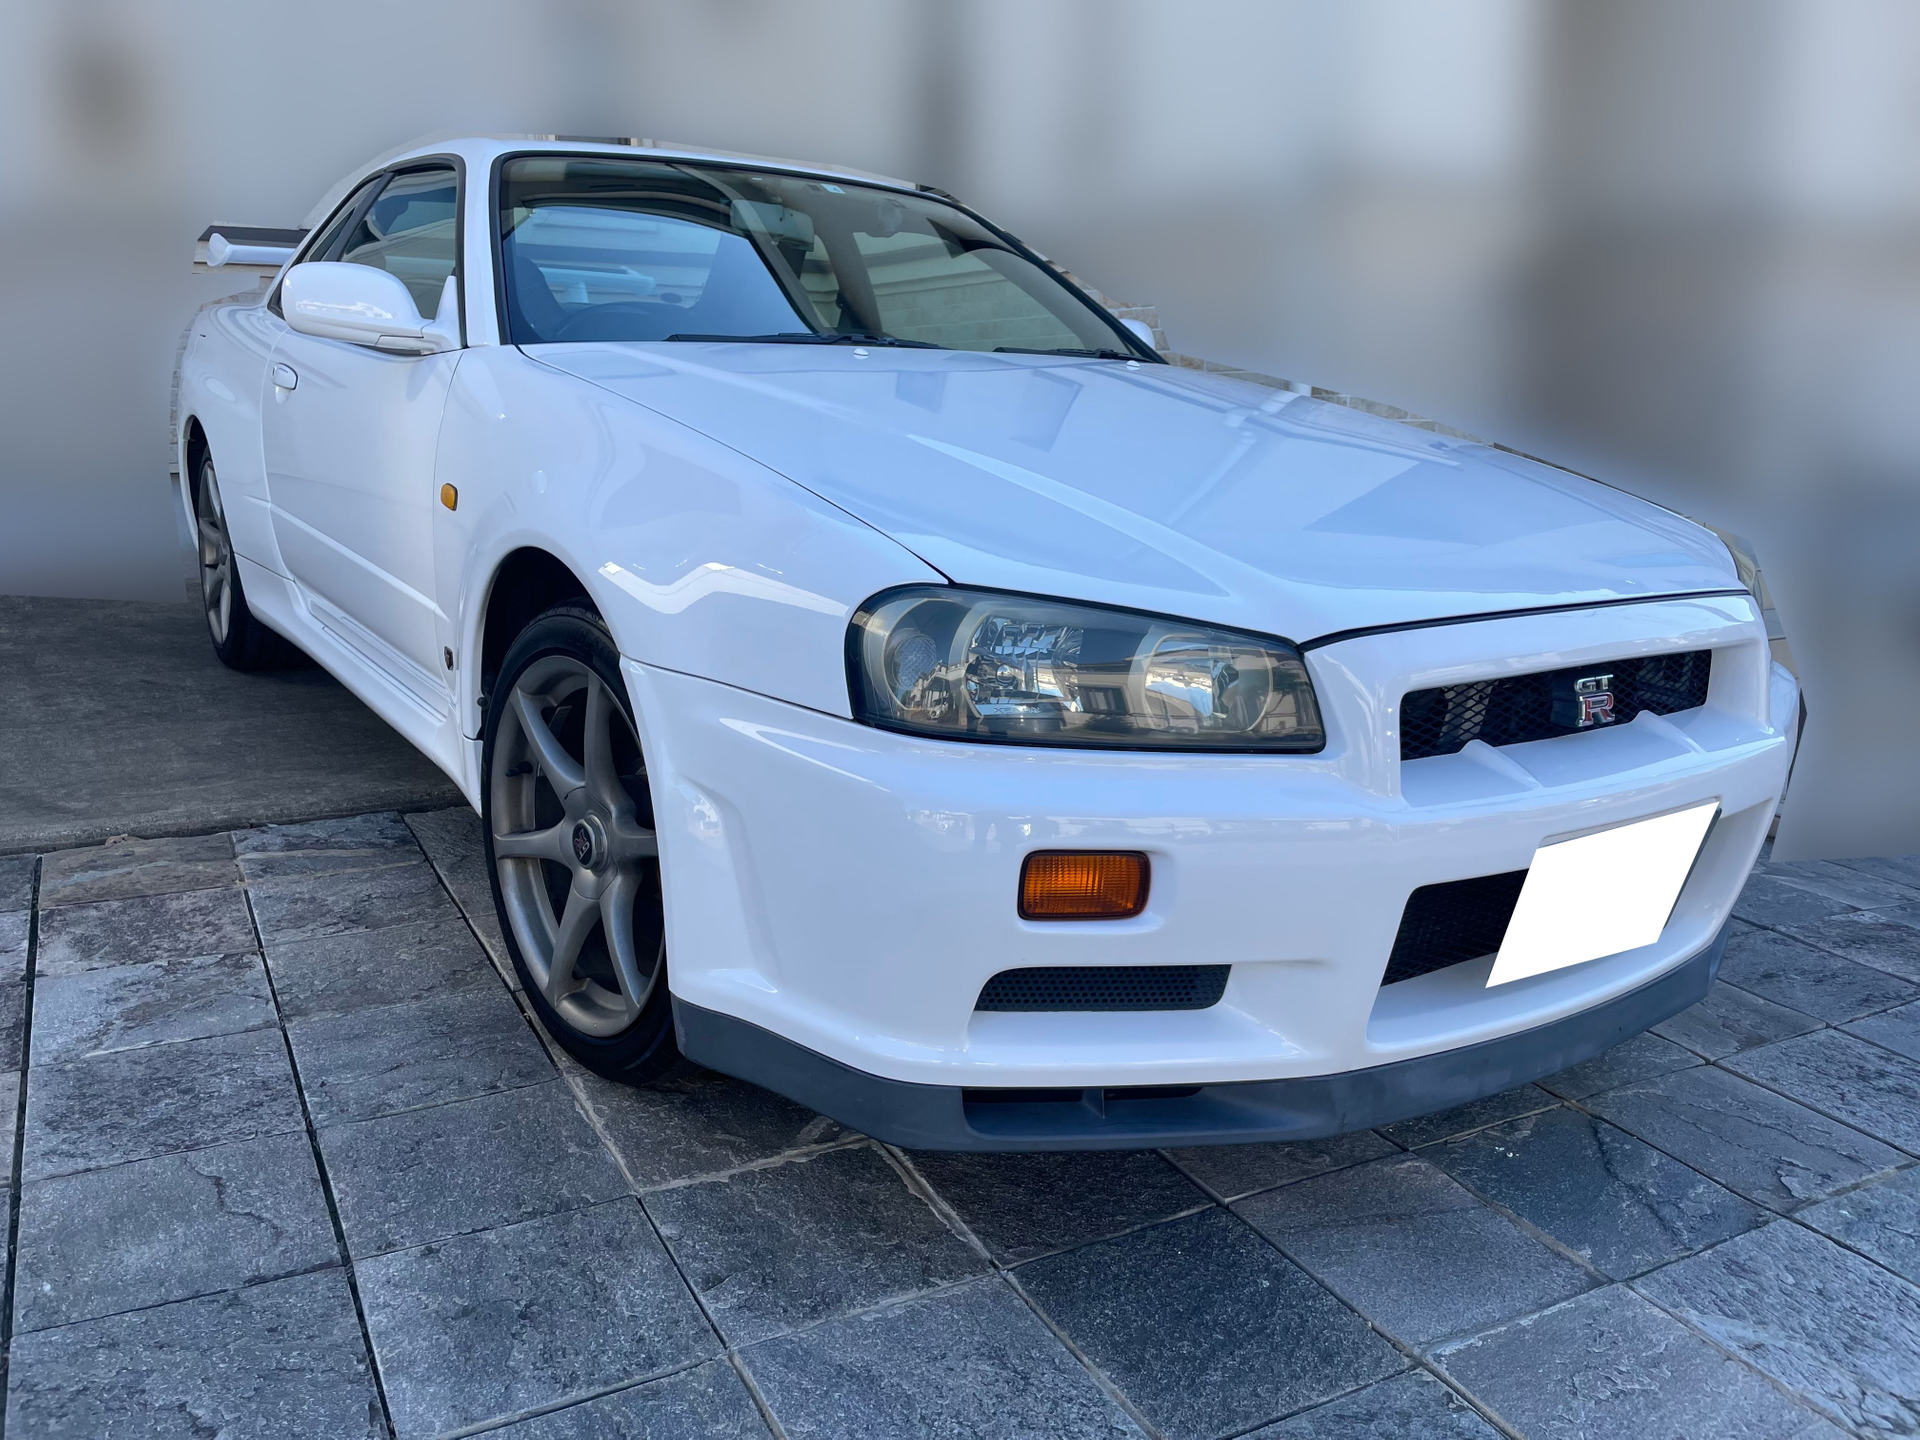 nissan skyline r34 used – Search for your used car on the parking